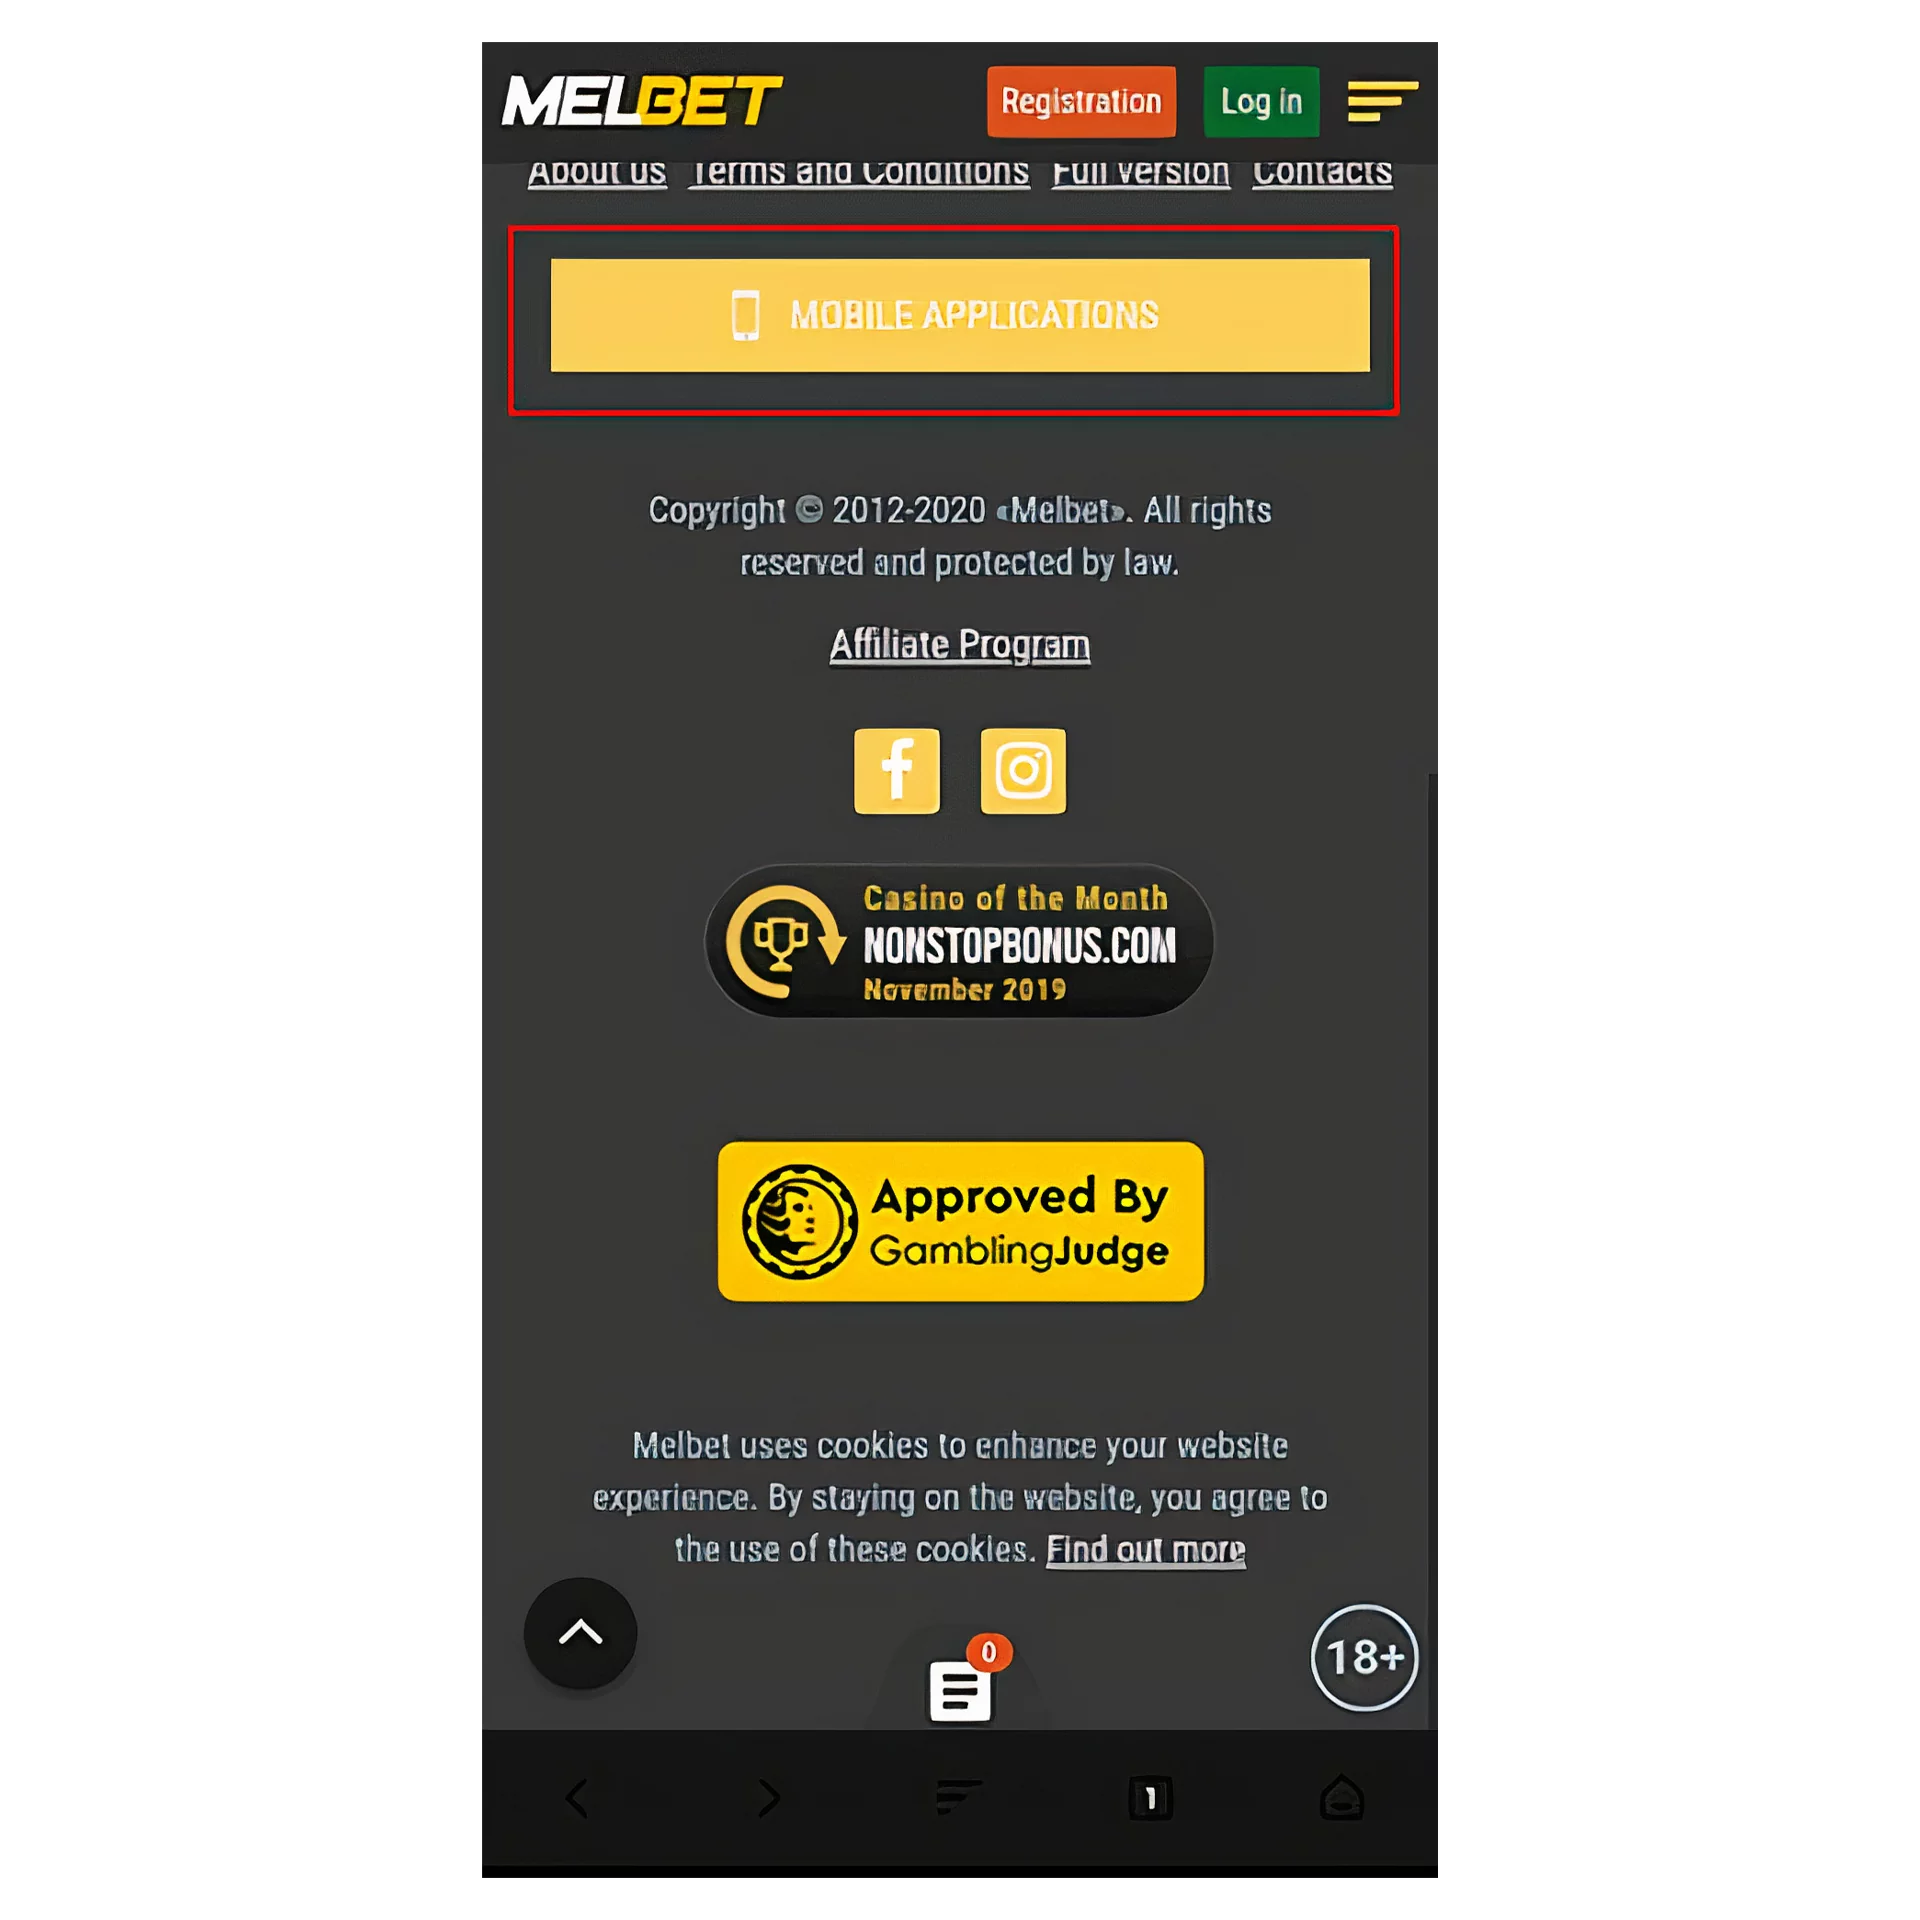 There are two versions of the Melbet app available to you.